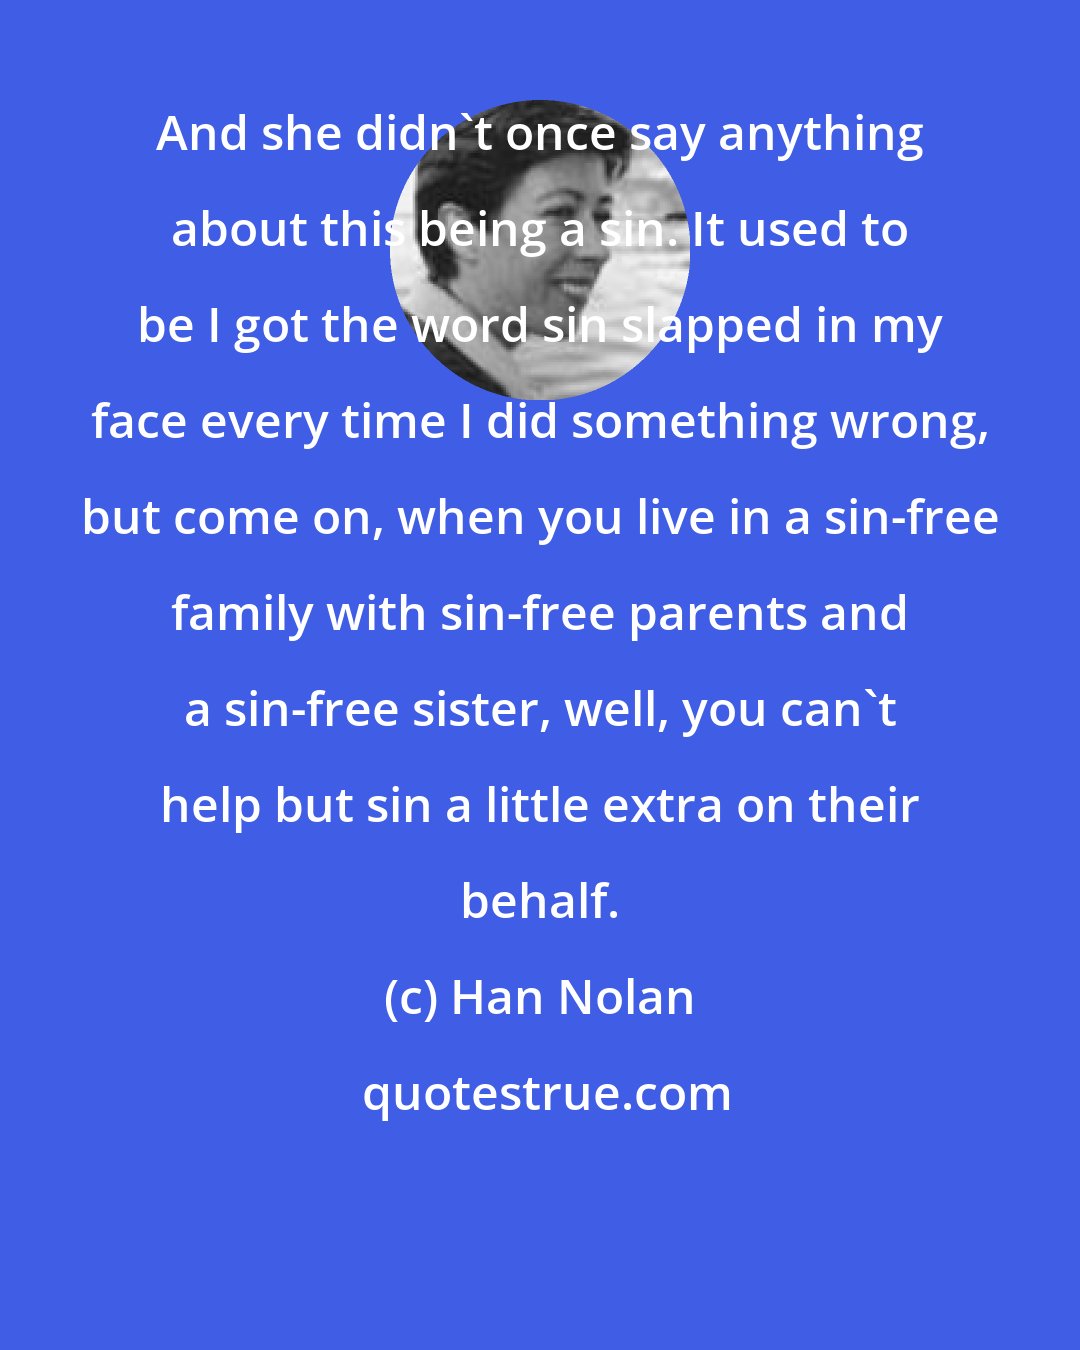 Han Nolan: And she didn't once say anything about this being a sin. It used to be I got the word sin slapped in my face every time I did something wrong, but come on, when you live in a sin-free family with sin-free parents and a sin-free sister, well, you can't help but sin a little extra on their behalf.